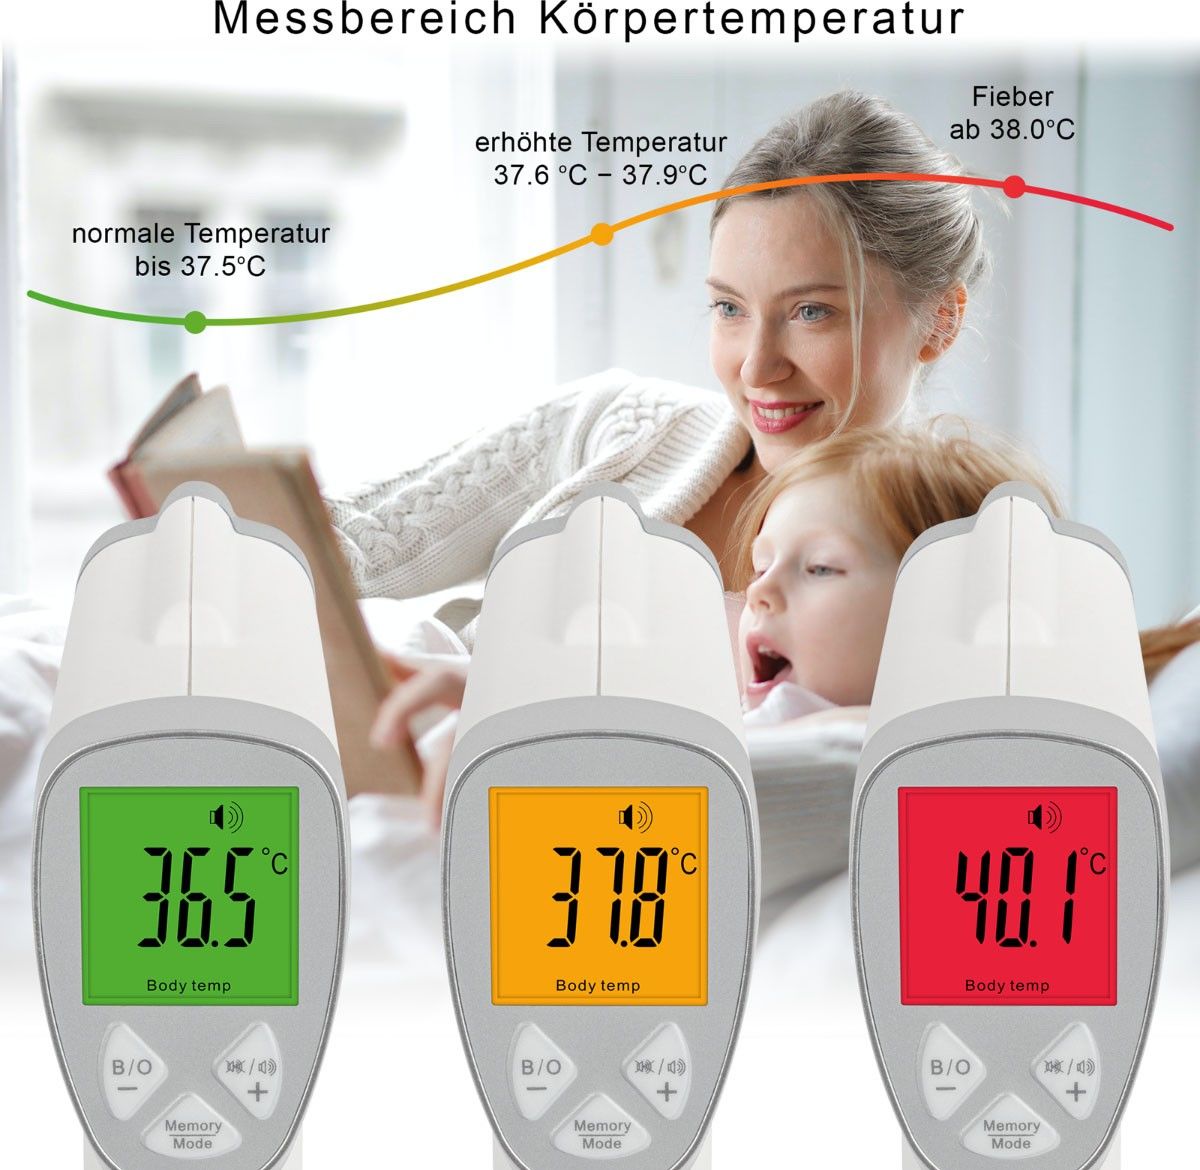 Fieberthermometer PC-FT 3094 ws